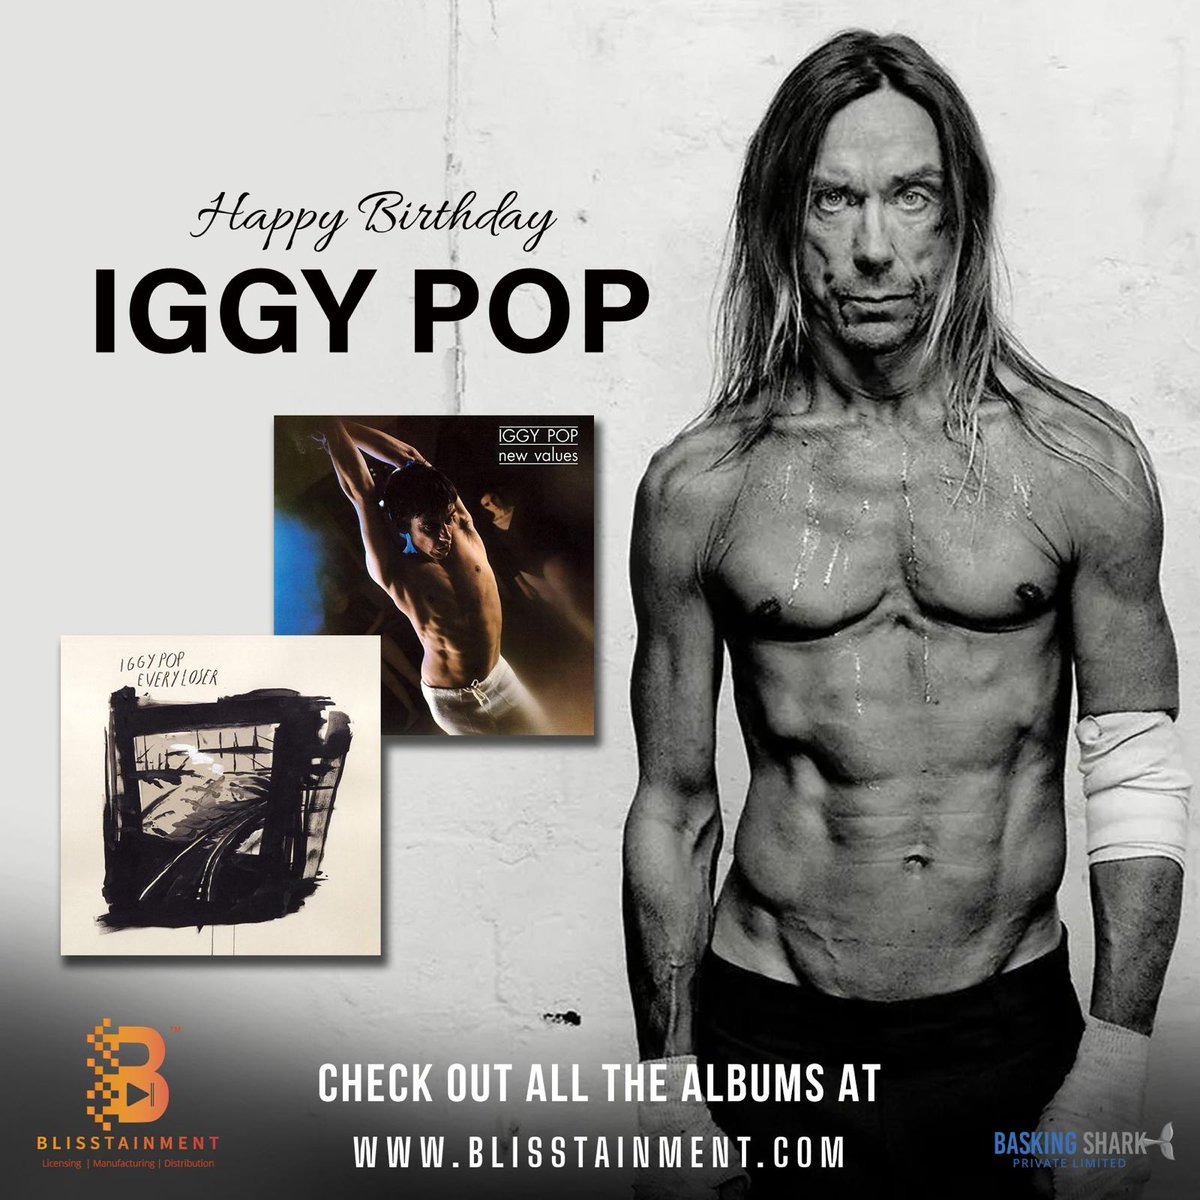 Happy Birthday to the legendary Iggy Pop! Your music has inspired generations and left an indelible mark on the industry. 

#IggyPop #Legend #RockIcon #BirthdayBoy #MusicLegend #PunkRock